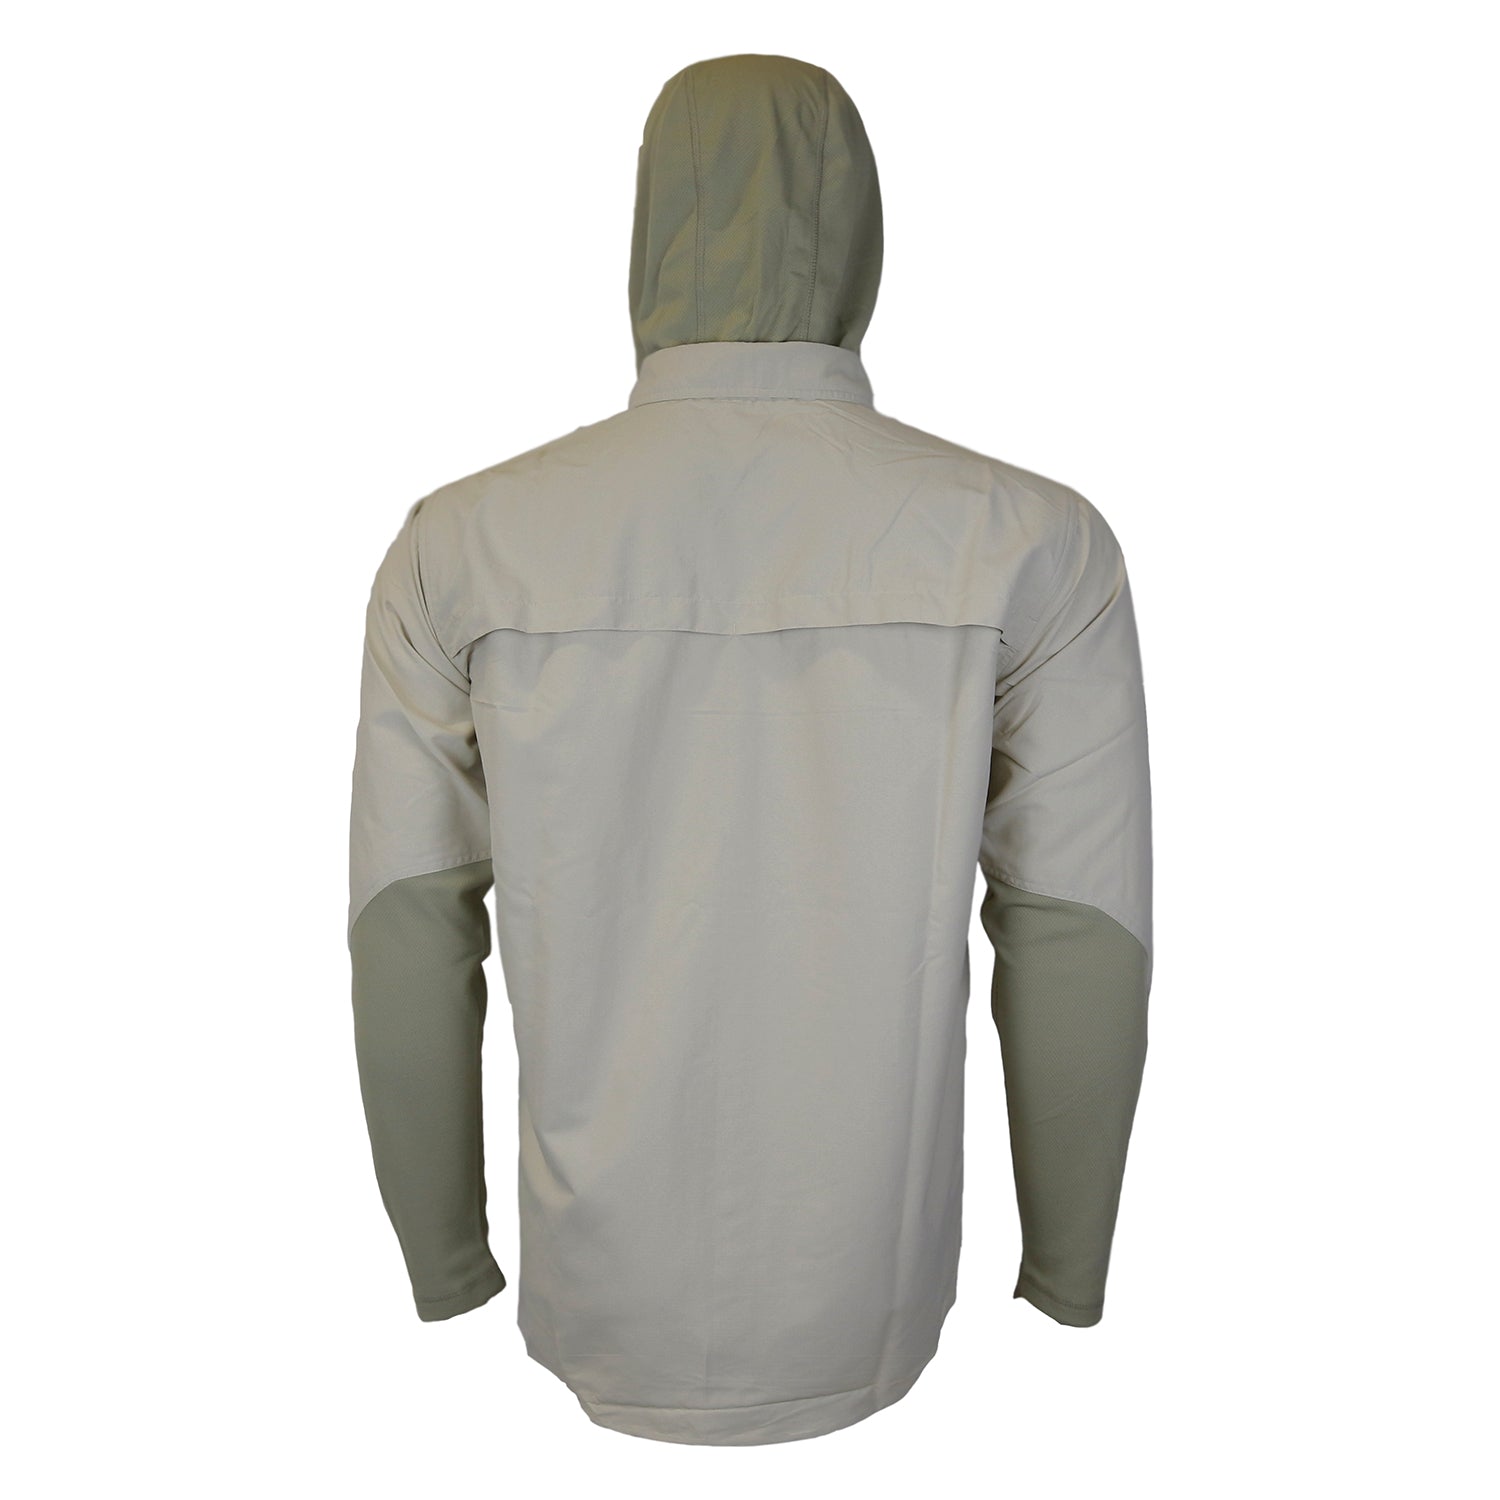 Back view of a tan button down shirt with crew sleeves, a collar and a hood up.